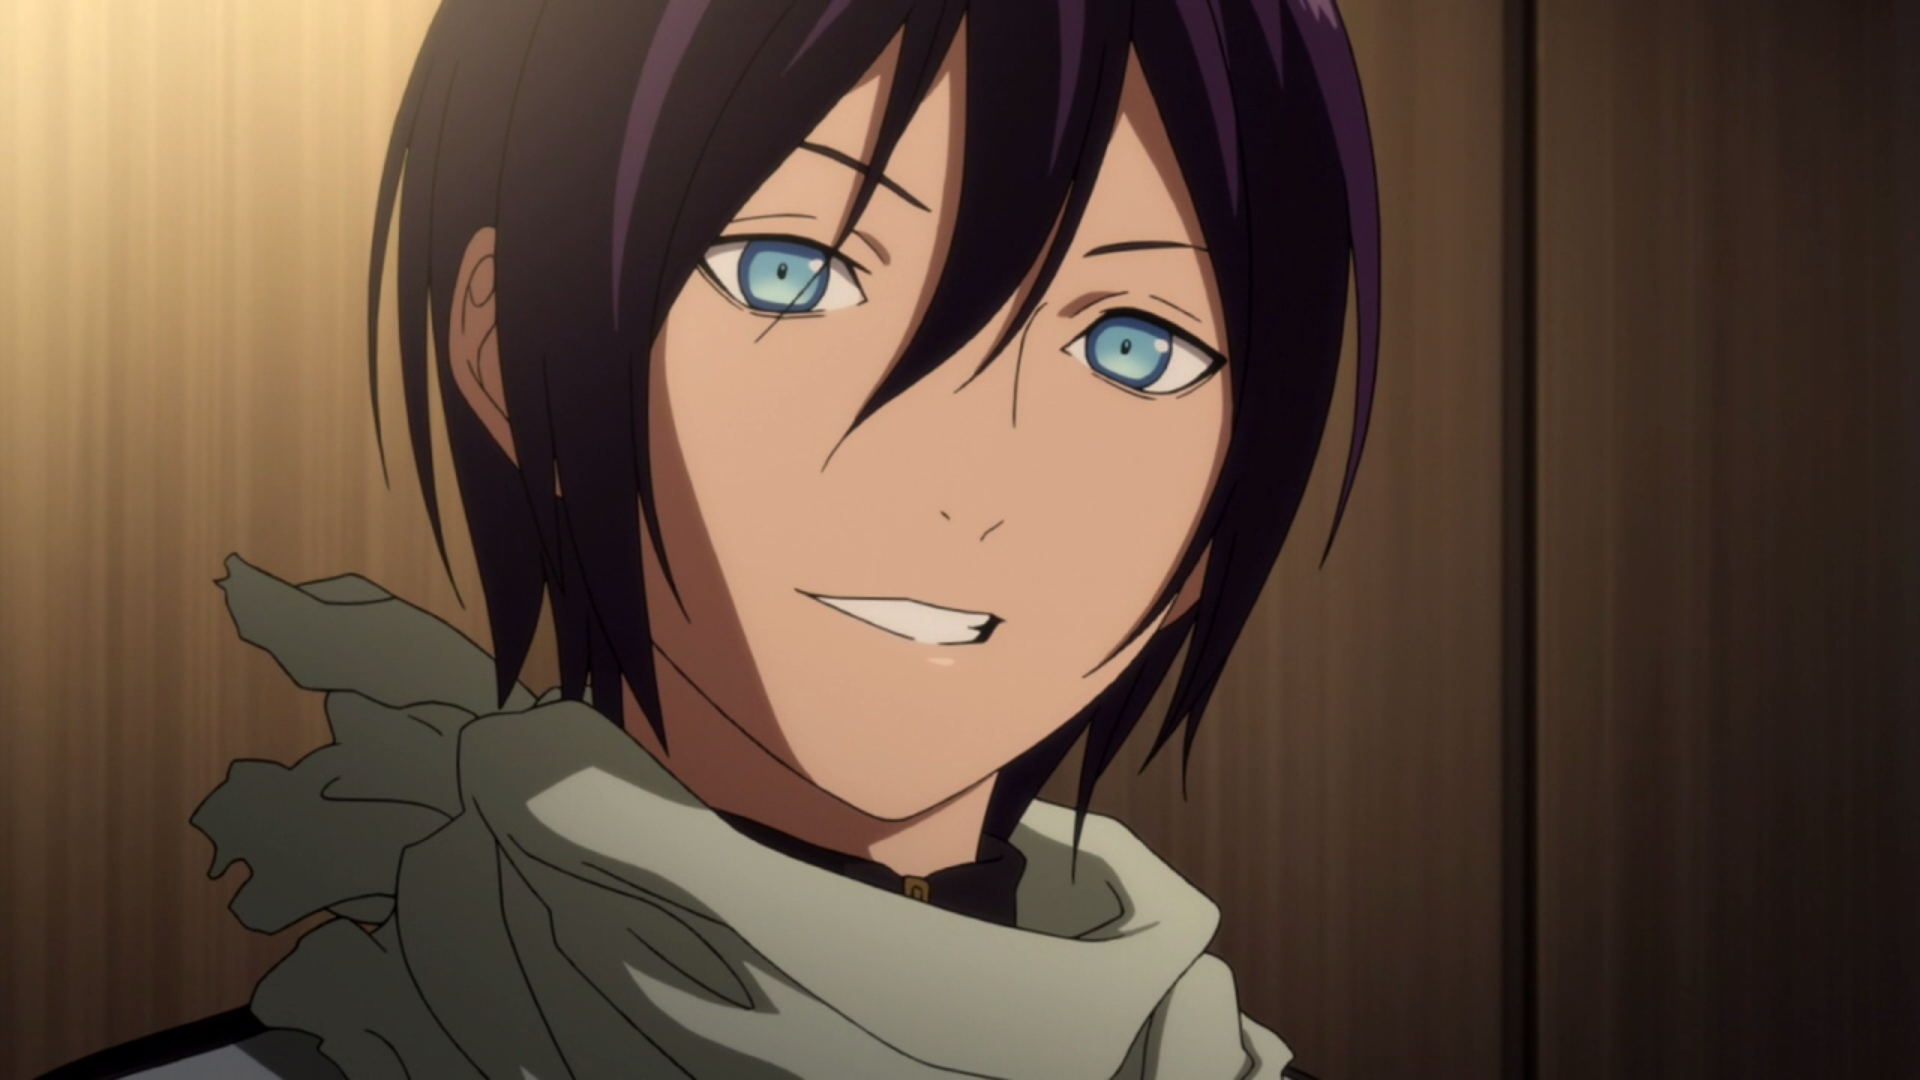 Free Download Yato Noragami Wiki [1920x1080] For Your Desktop Mobile And Tablet Explore 50